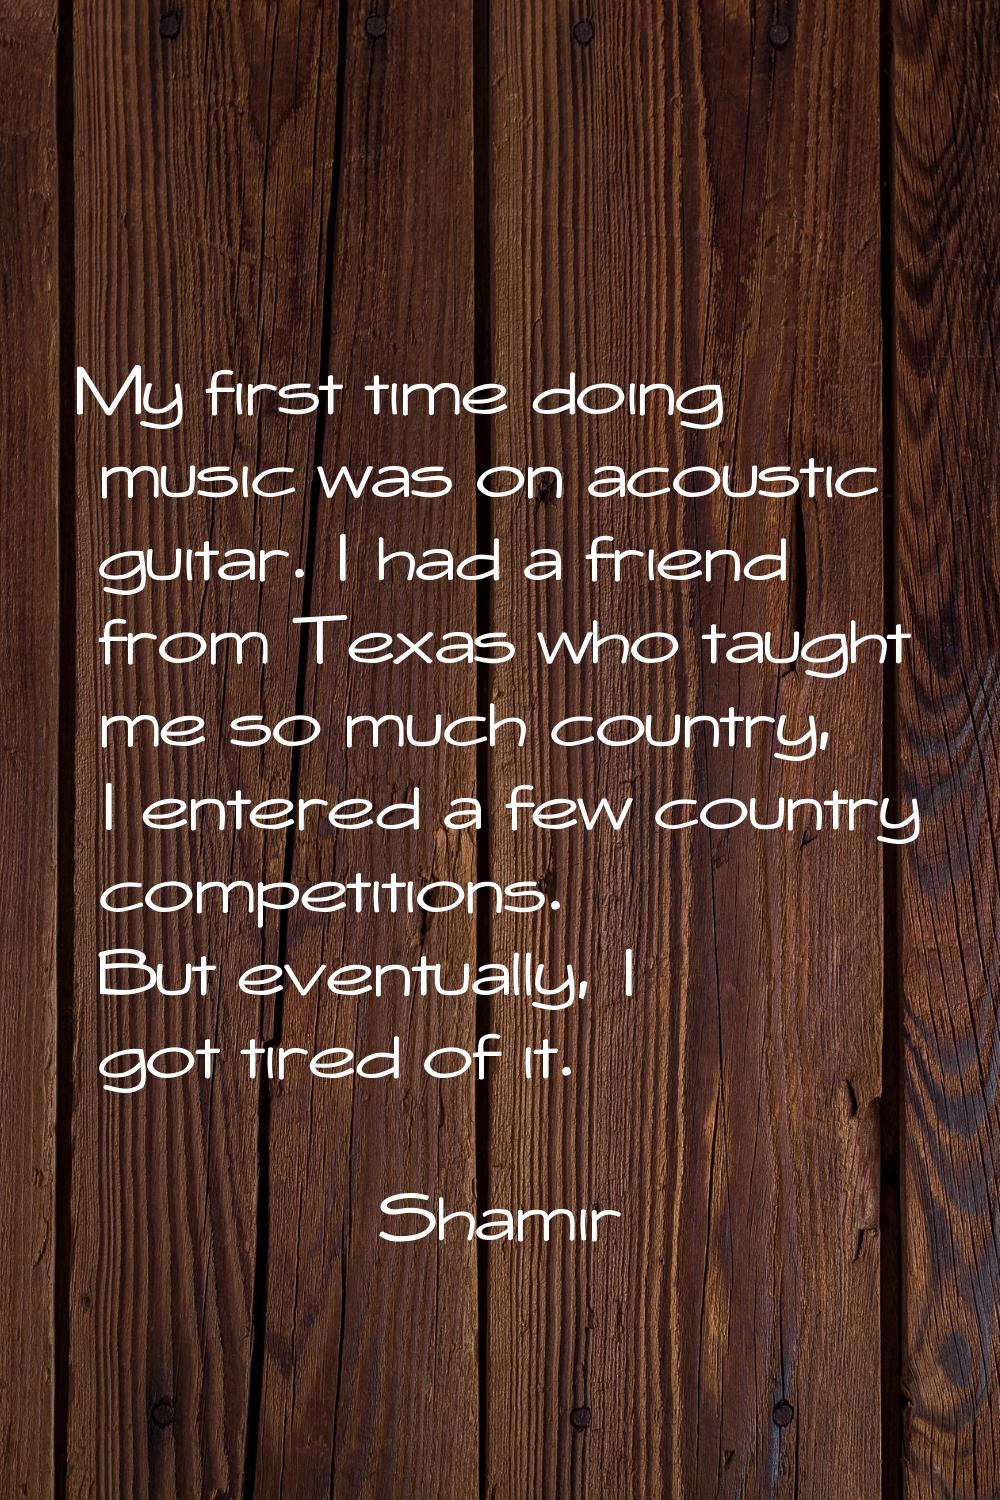 My first time doing music was on acoustic guitar. I had a friend from Texas who taught me so much c